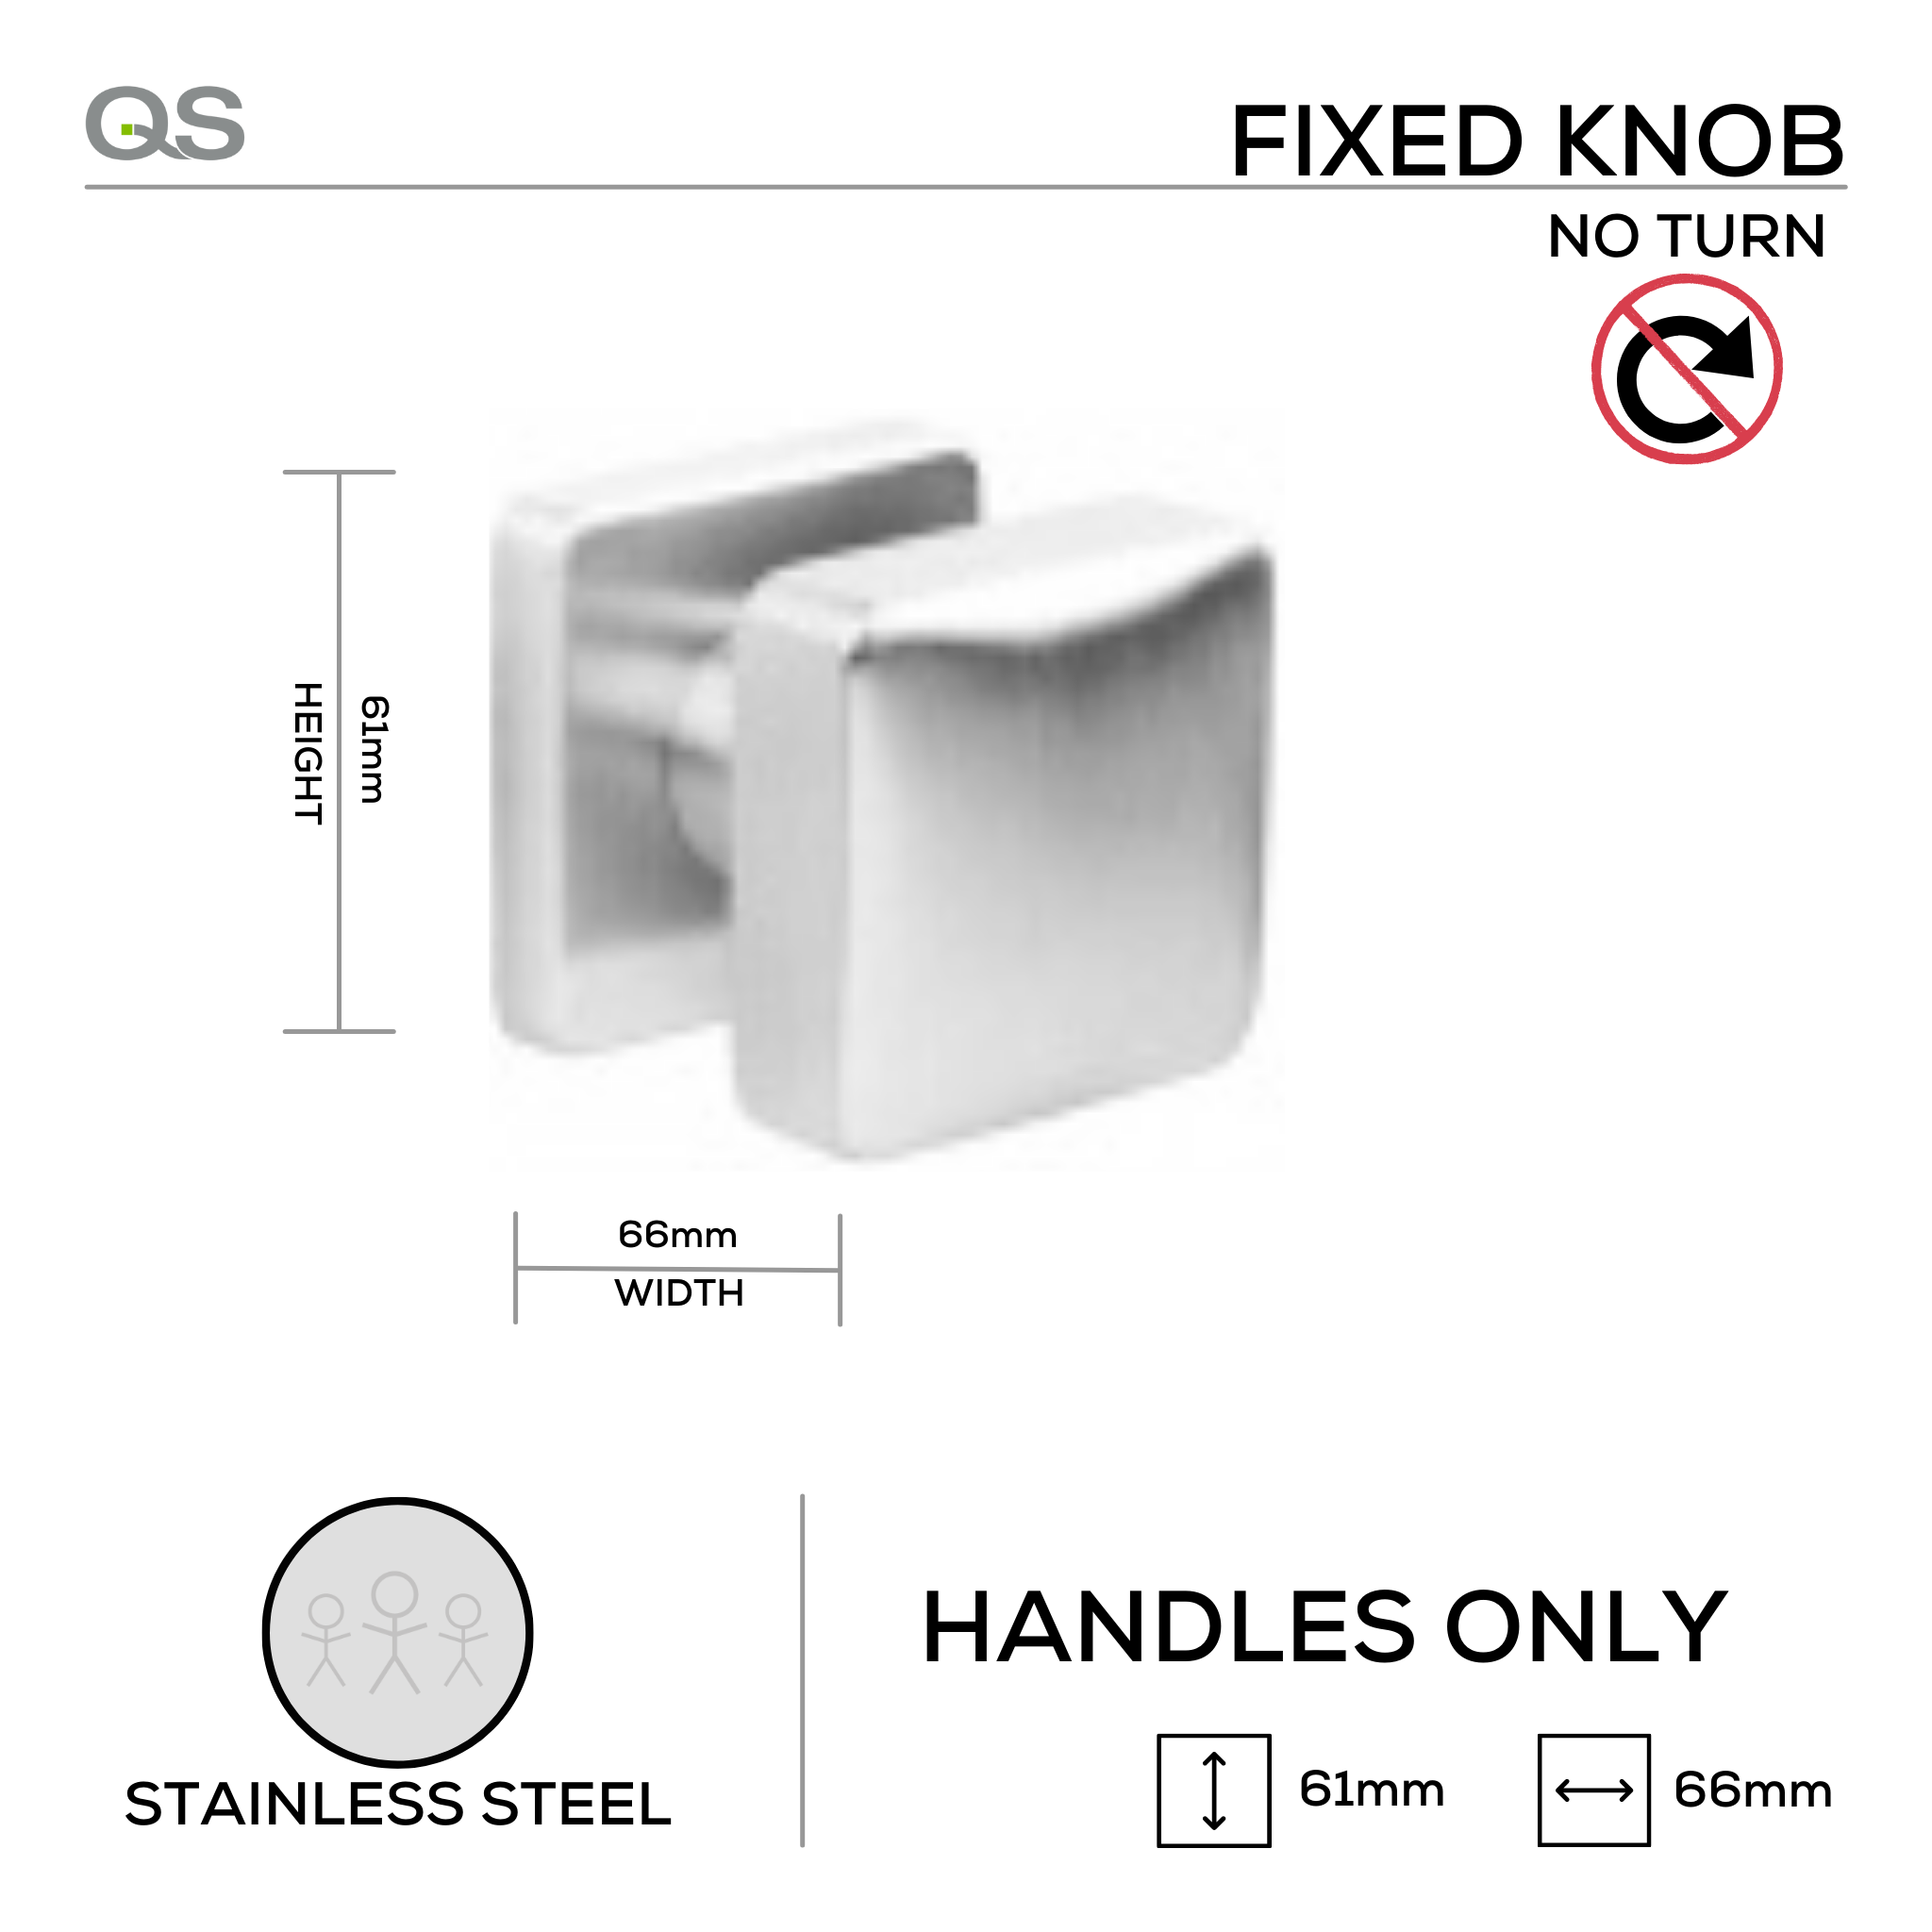 QS3815, Knob Handle, Fixed Square Raised, Stainless Steel, QS